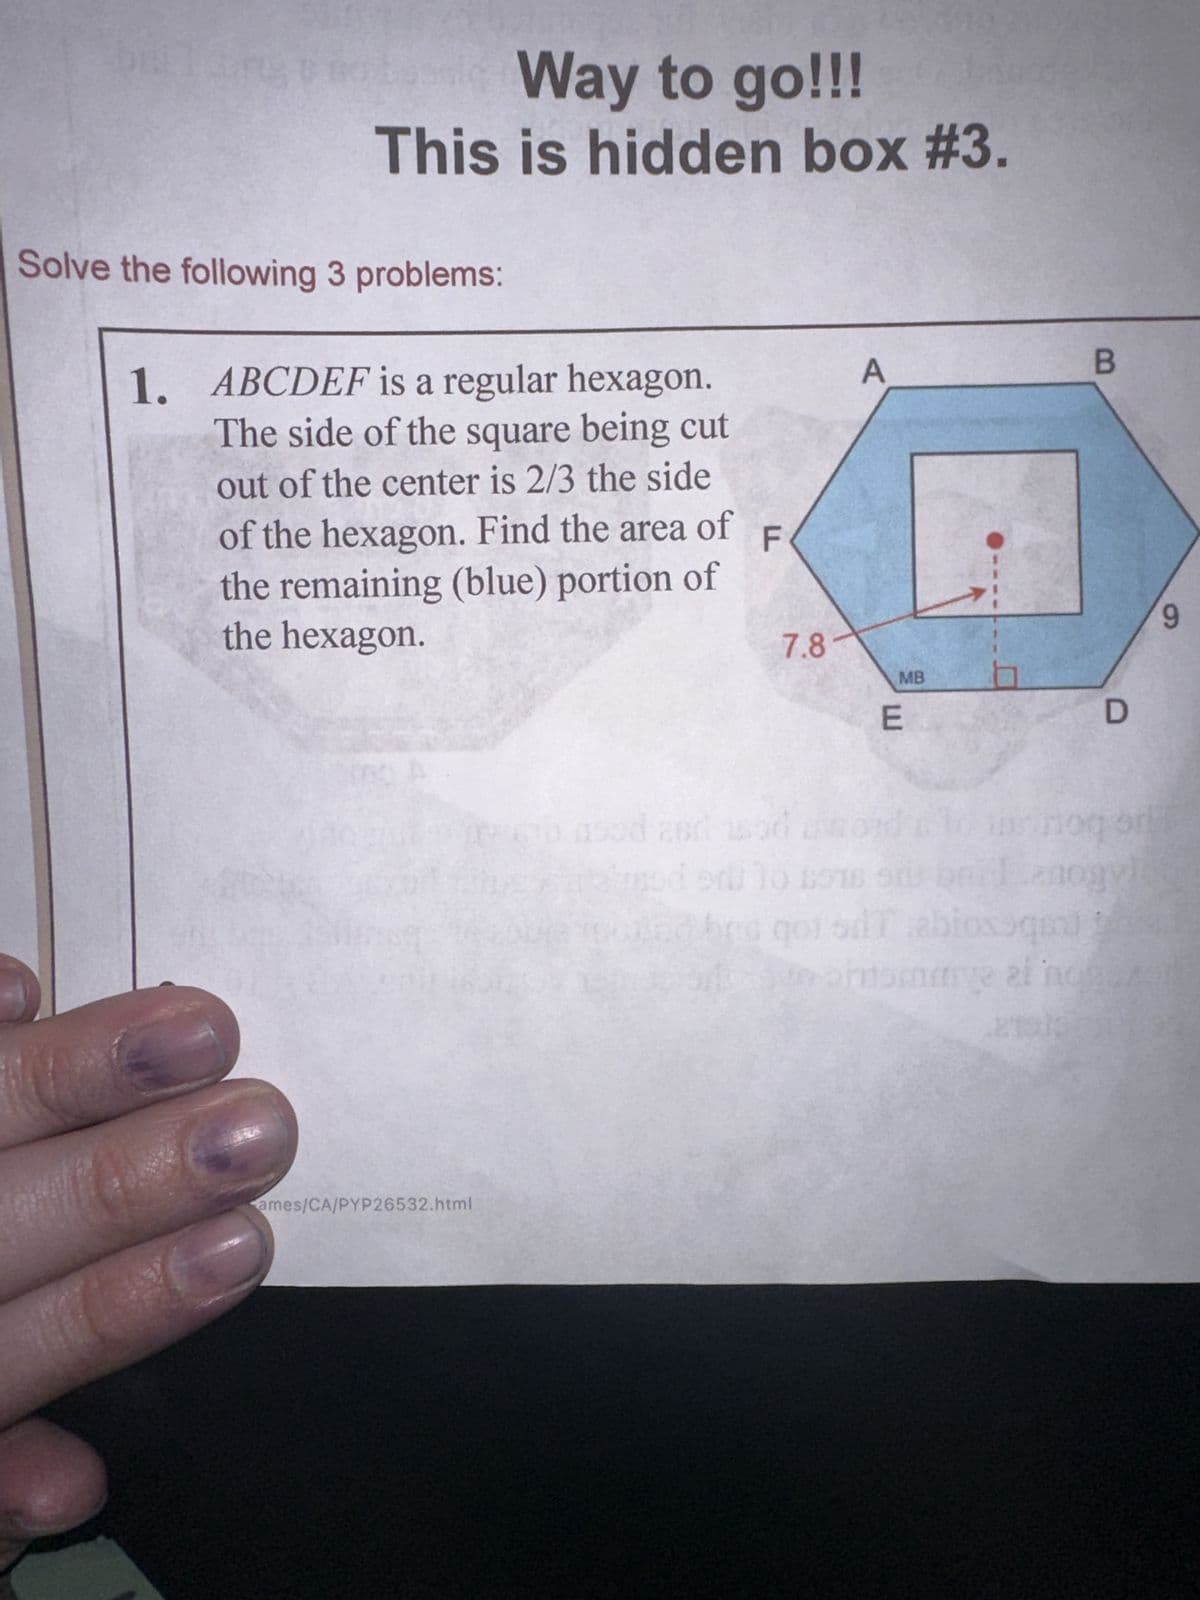 Way to go!!!
This is hidden box #3.
Solve the following 3 problems:
1. ABCDEF is a regular hexagon.
The side of the square being cut
out of the center is 2/3 the side
of the hexagon. Find the area of
the remaining (blue) portion of
the hexagon.
F
ames/CA/PYP26532.html
7.8
MB
E
B
D
9
od amord 10 is nog on
du lo son os briznogy)
qot dTabloxoqeal god
pinome al noros
2010 03